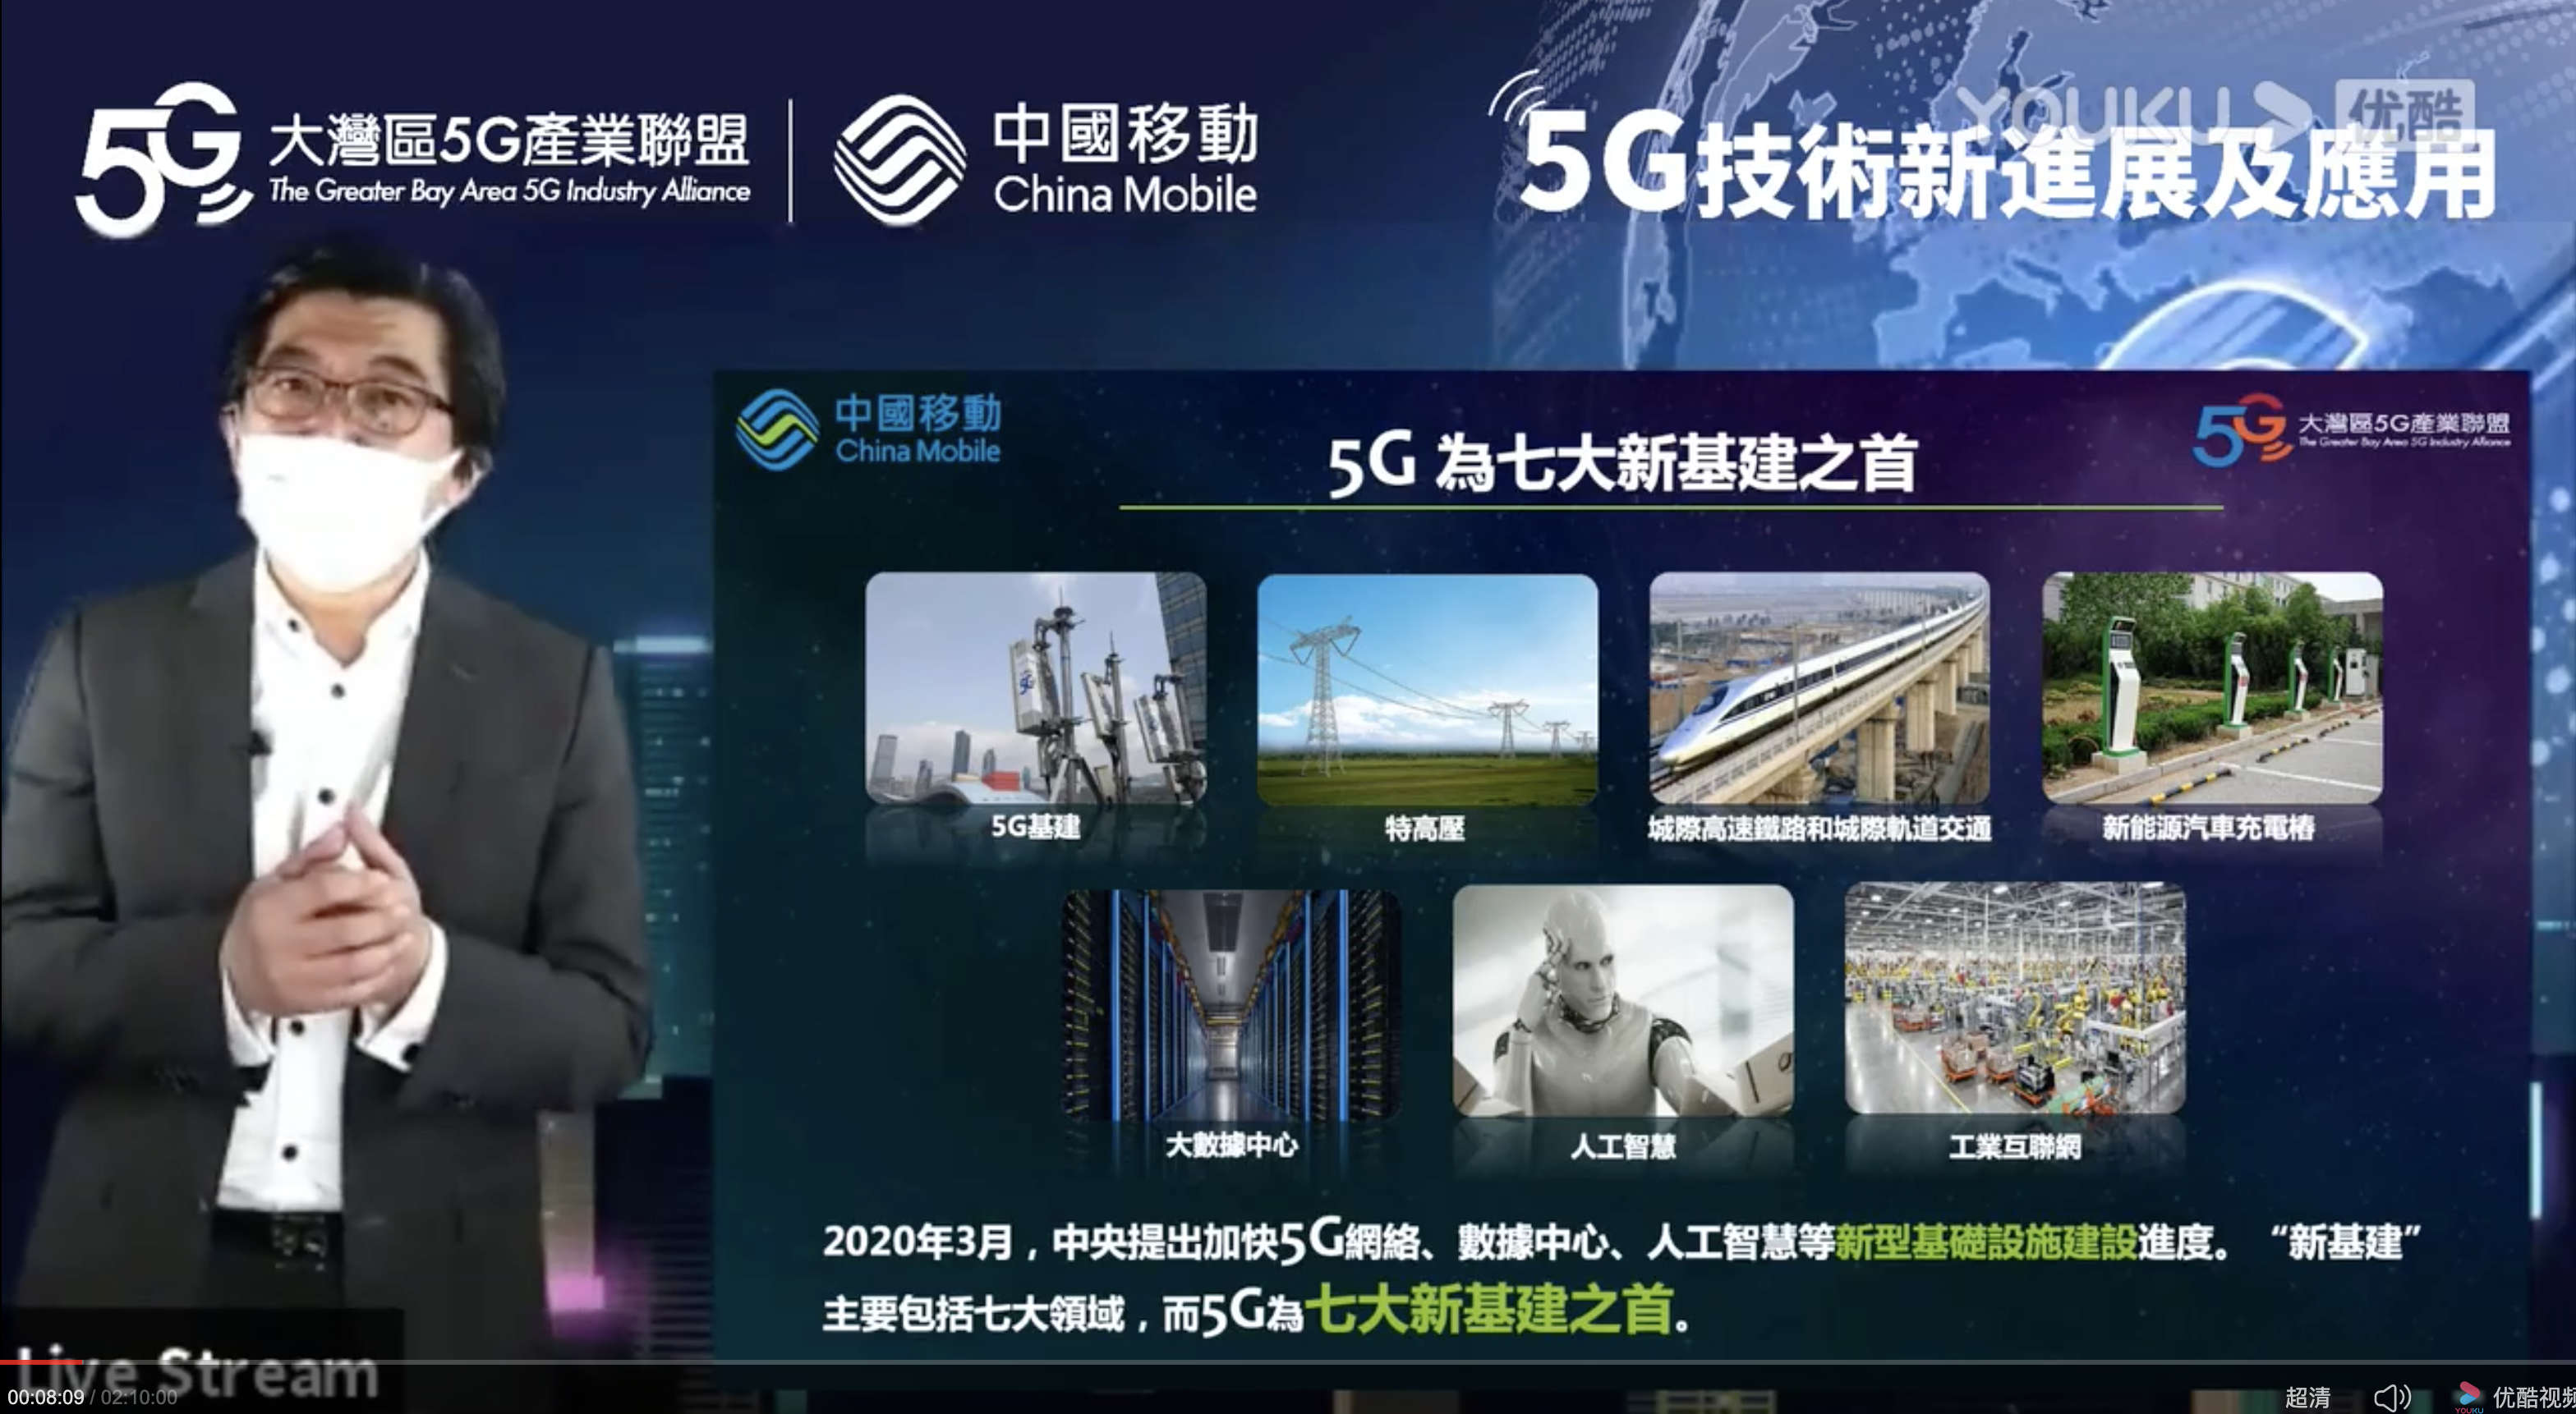 New Progress and Application of 5G Technology-Video Review